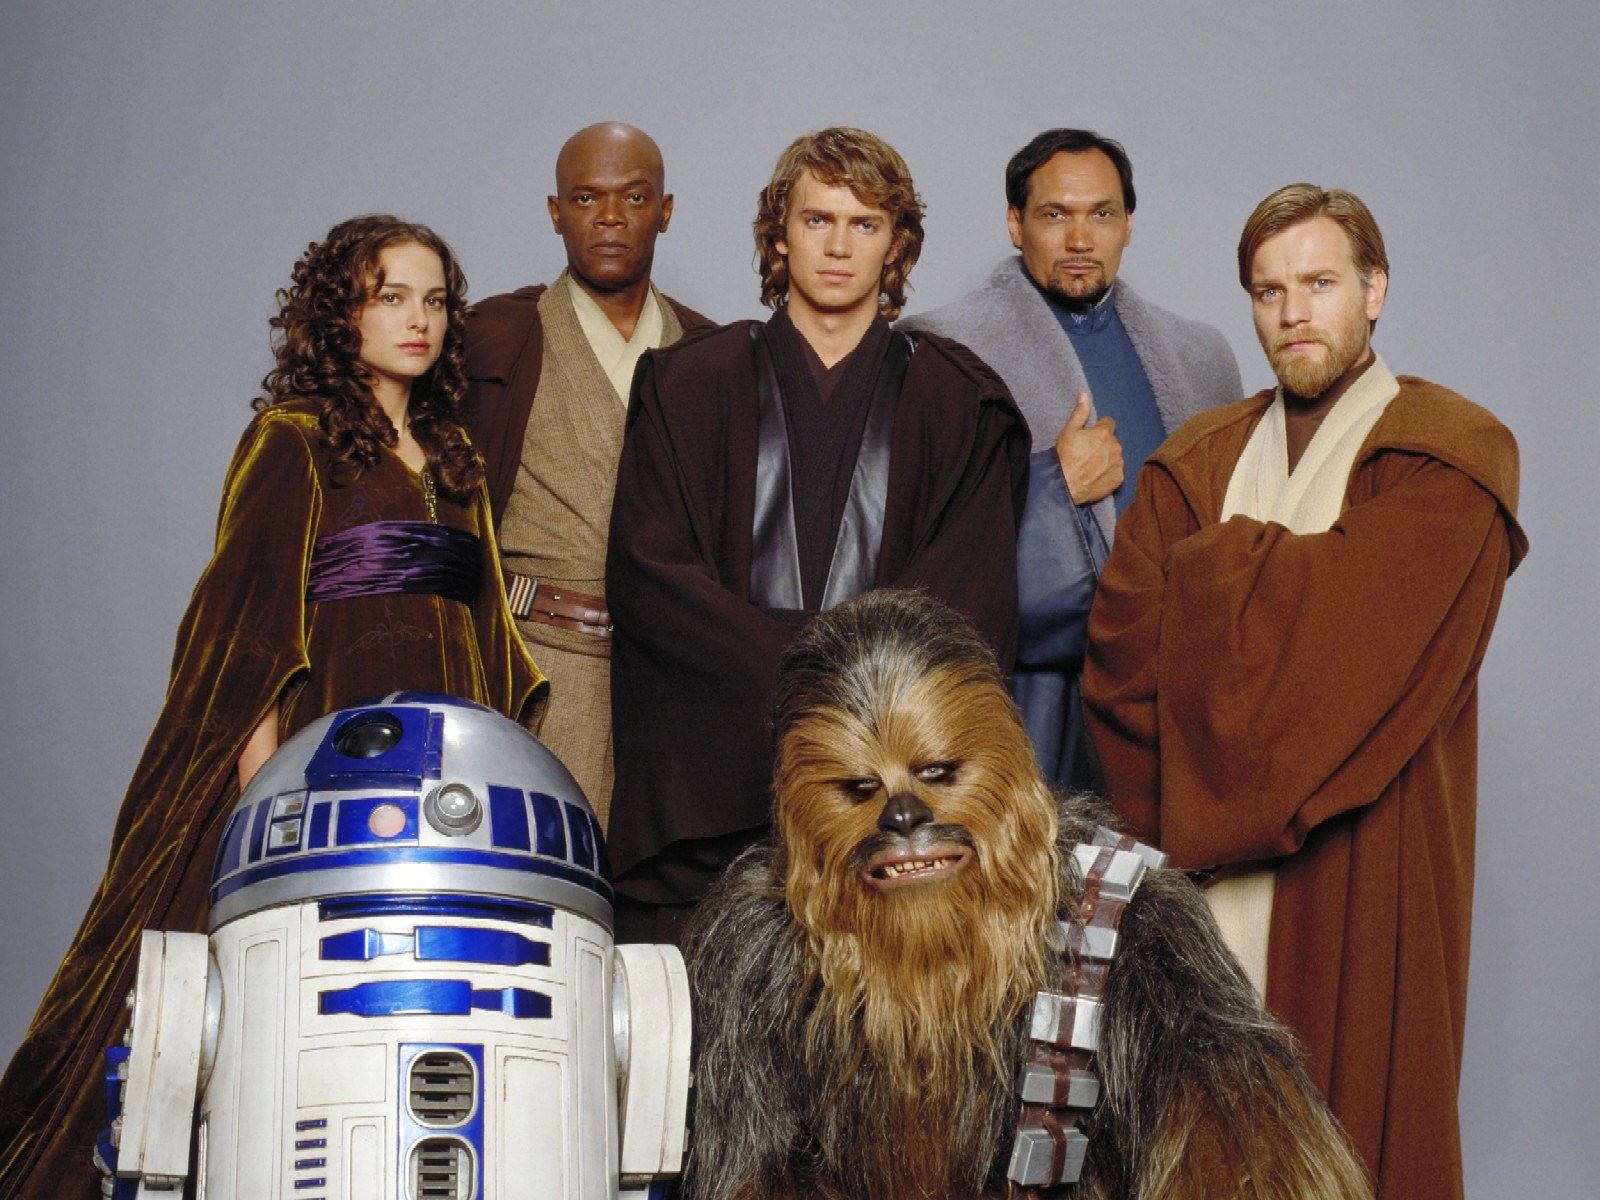 star-wars-revenge-of-the-sith-is-10-years-old-but-where-are-they-now-411985.jpg